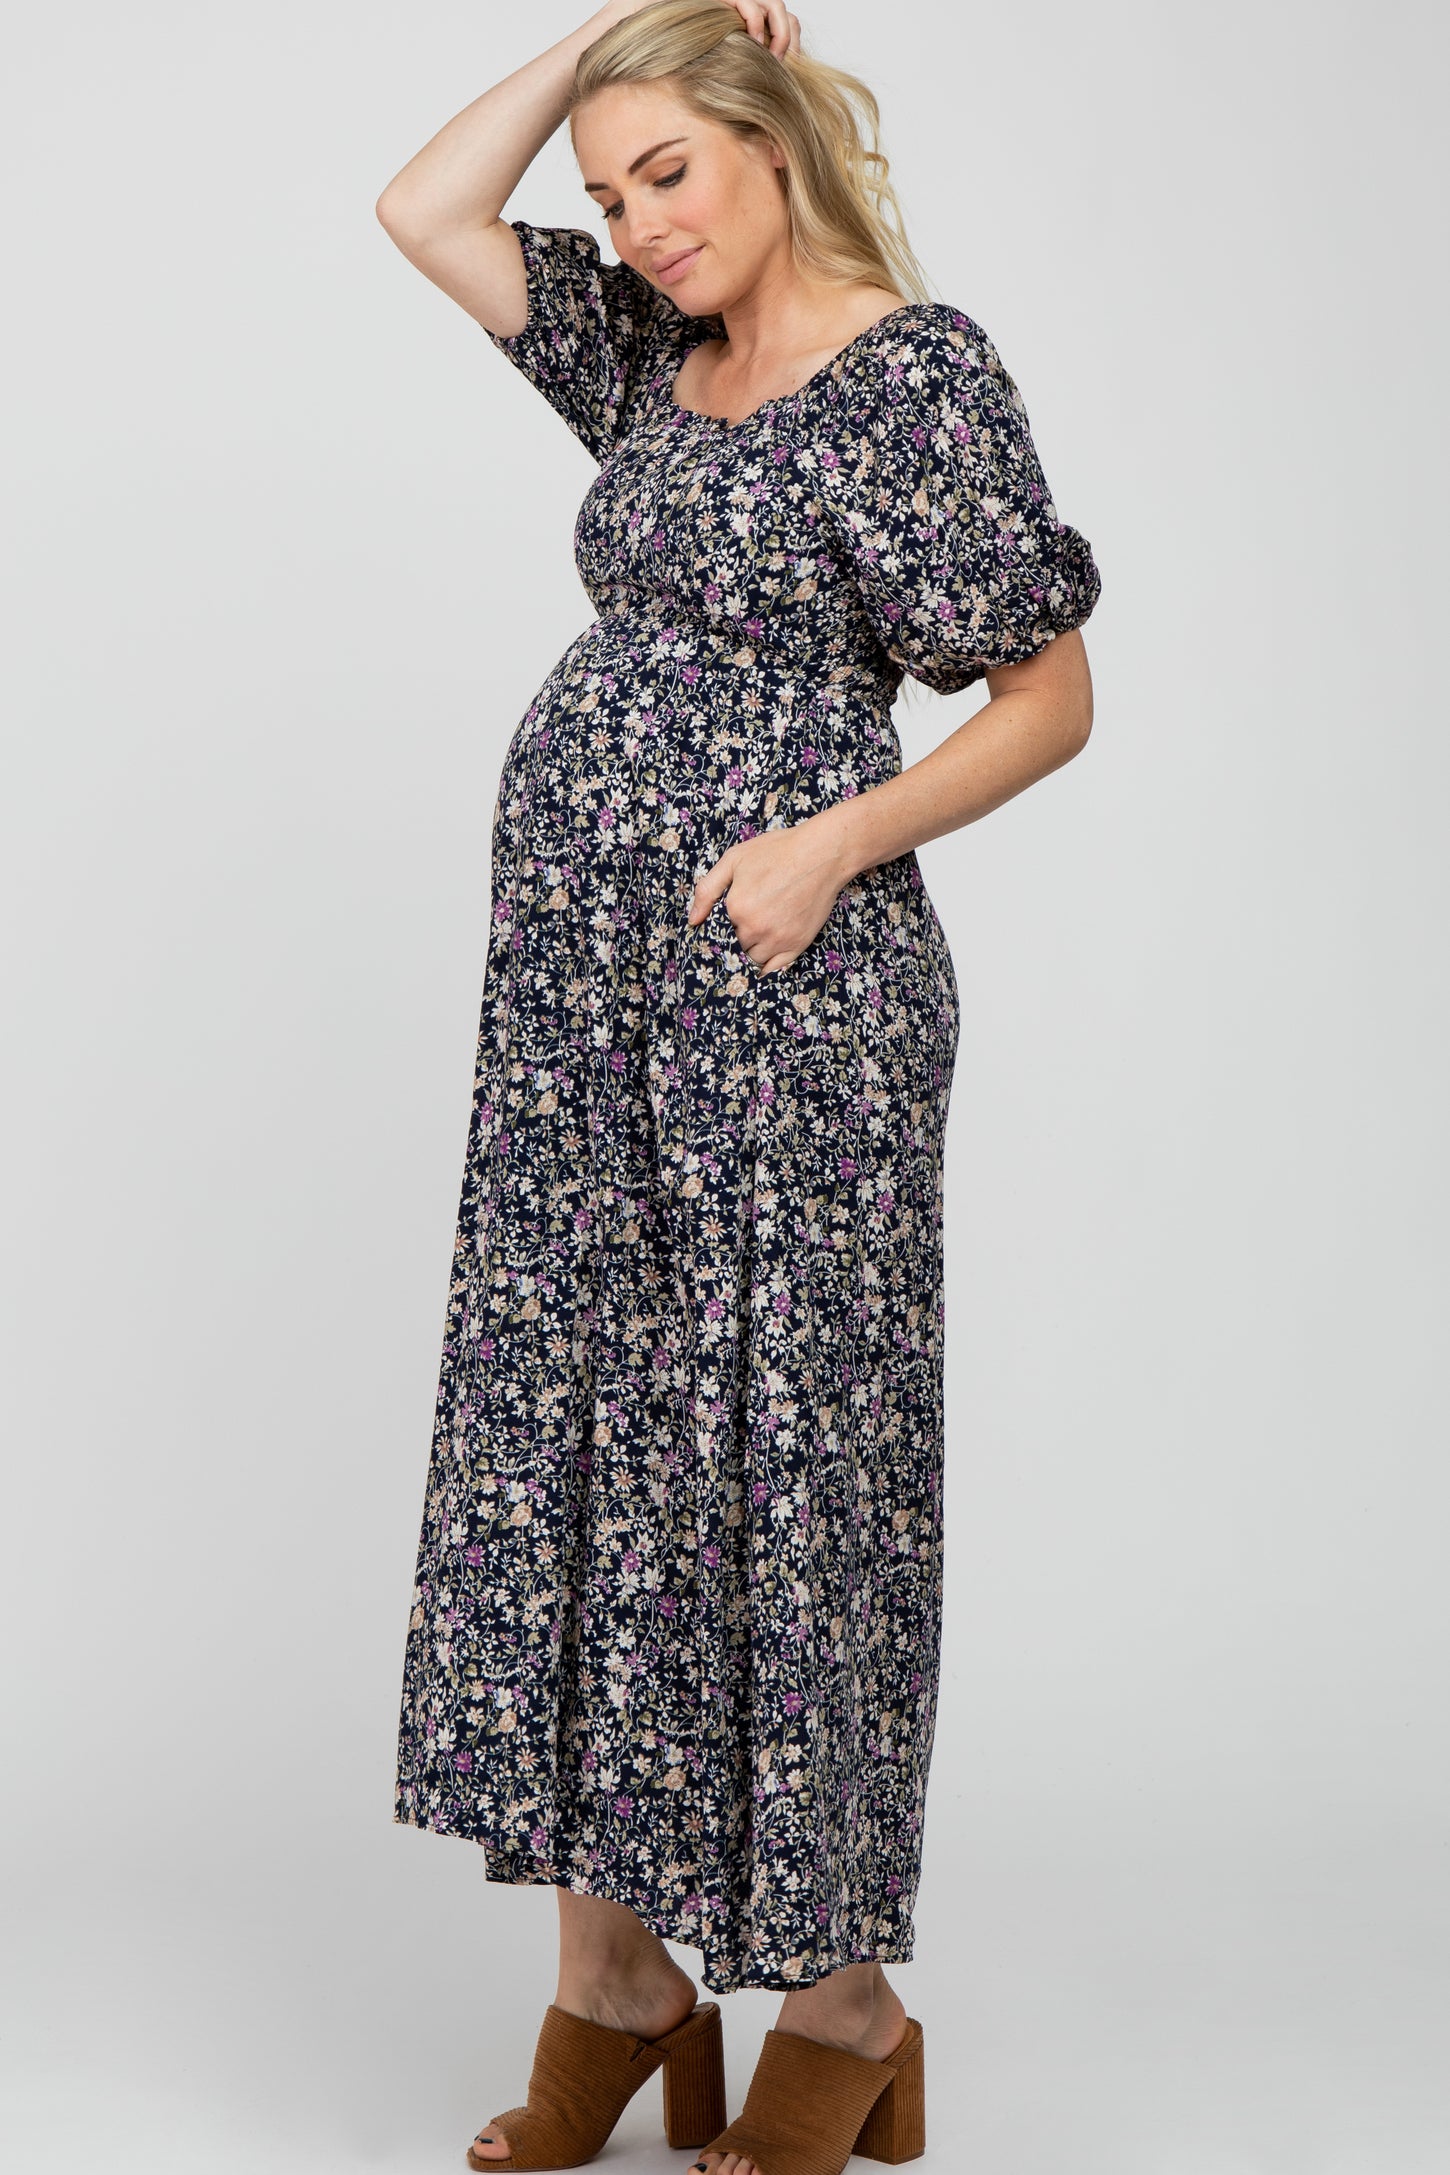 Navy Blue Floral Square Neck Short Puff Sleeve Maternity Maxi Dress–  PinkBlush